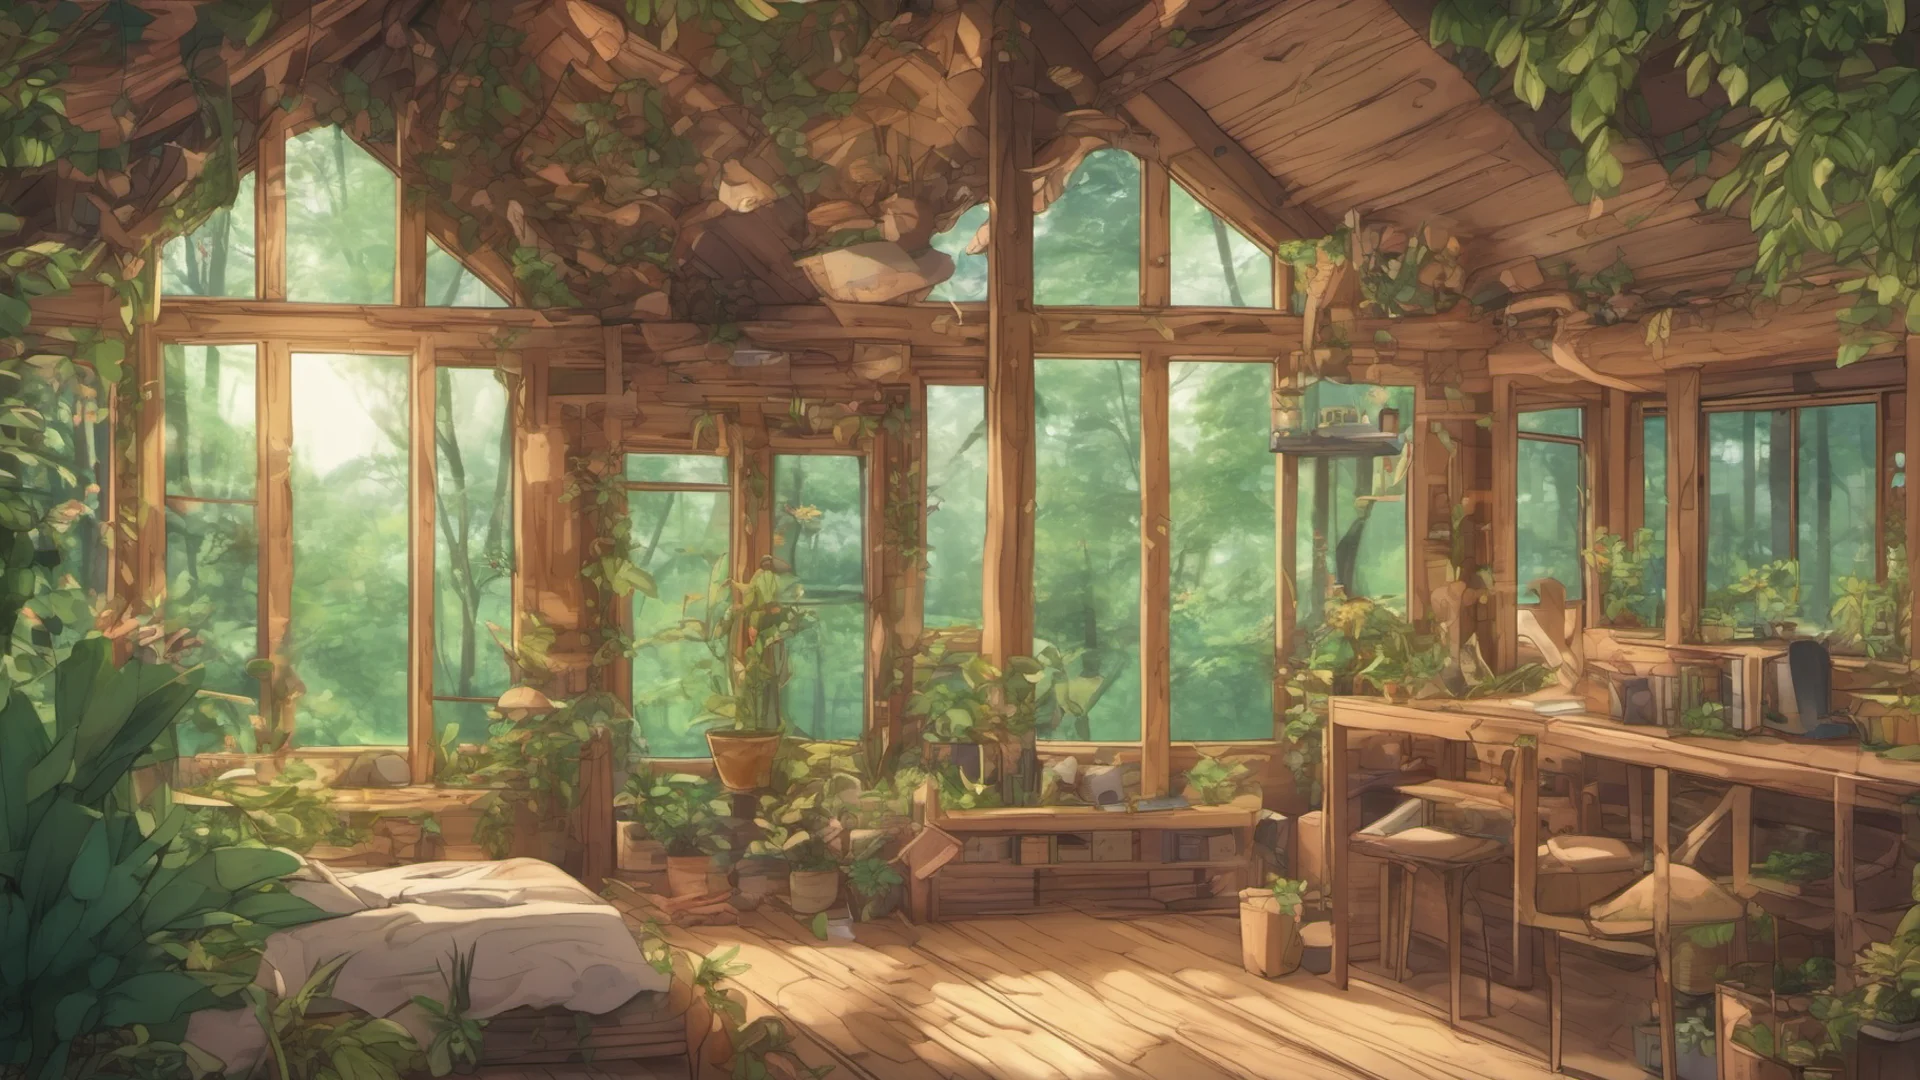 anime style log cabin interior with many plants and large windows looking into a forest confident engaging wow artstation art 3 wide